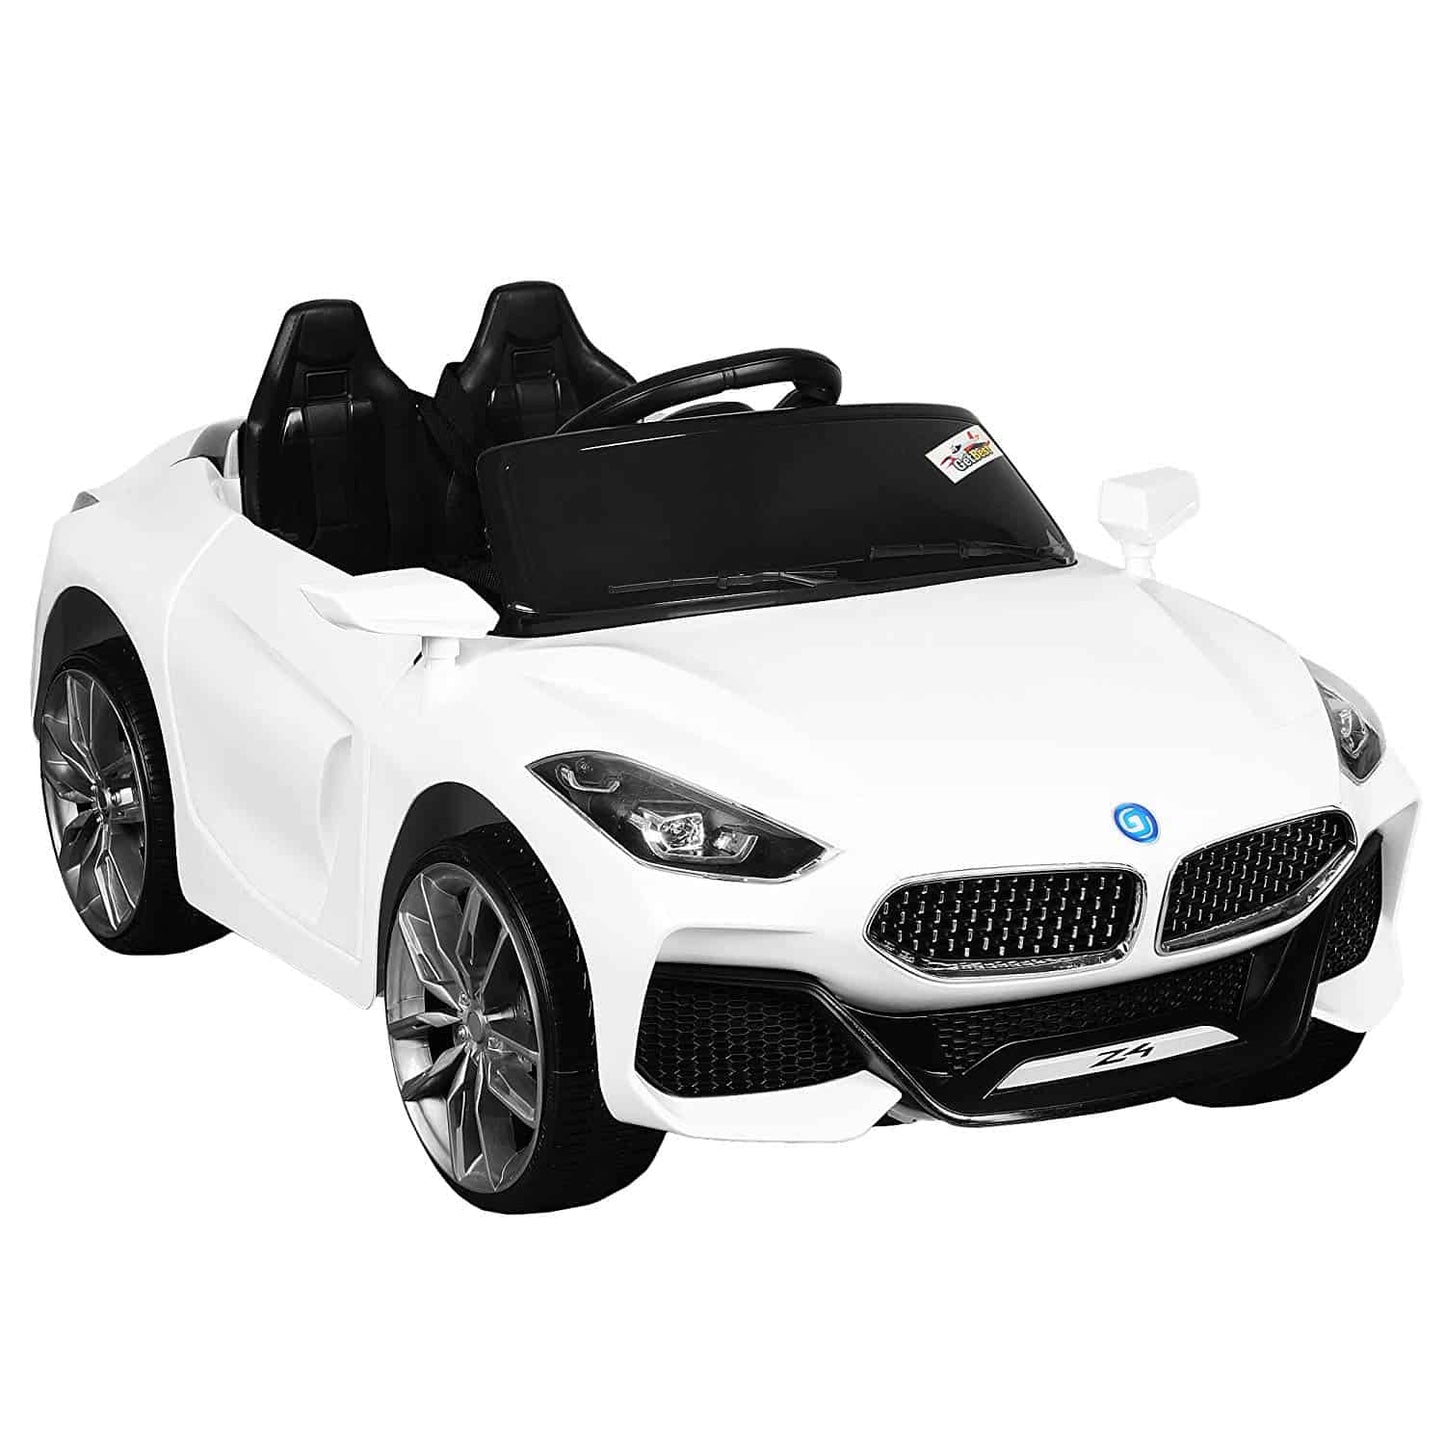 Z4 Kids Battery Operated Ride on Car for Kids with | Suitable for 2-7 Years| 12V Battery| Twin Motors| Swing Function| White